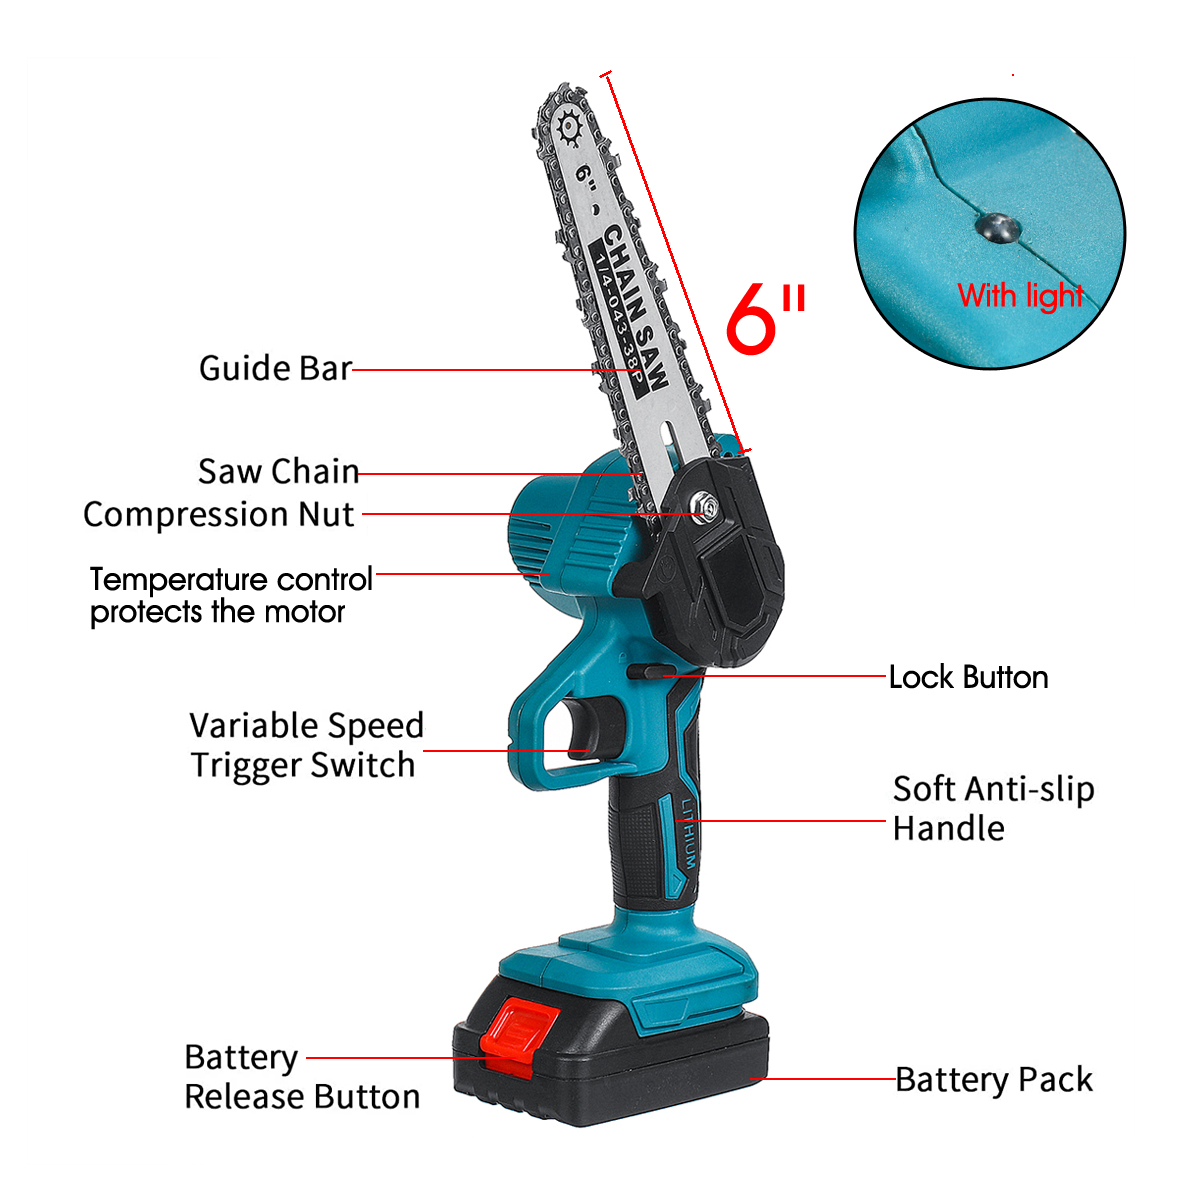 6-Inch-Electric-Chain-Saw-Portable-Chainsaws-Cutter-Woodworking-Tool-W-1pc-or-2pcs-Battery-1824775-12